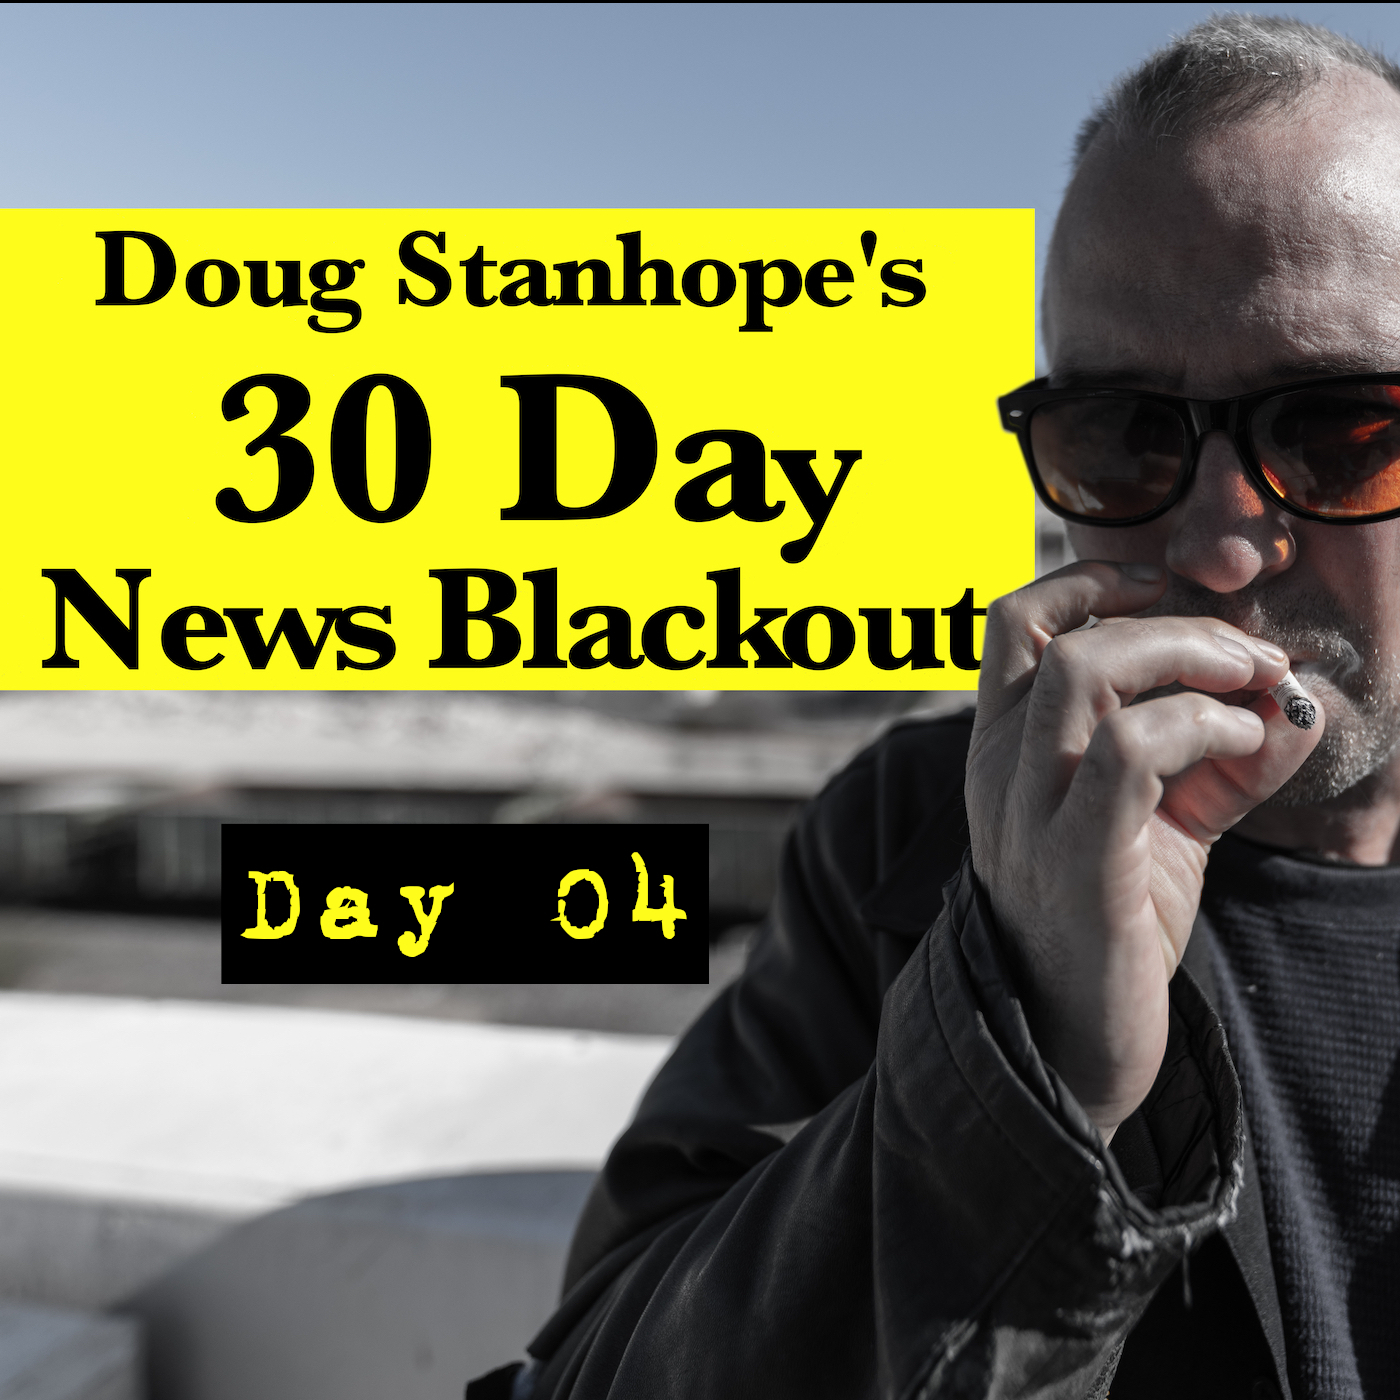 EP.#367: Day 04 - Stanhope’s 30 Day News Blackout